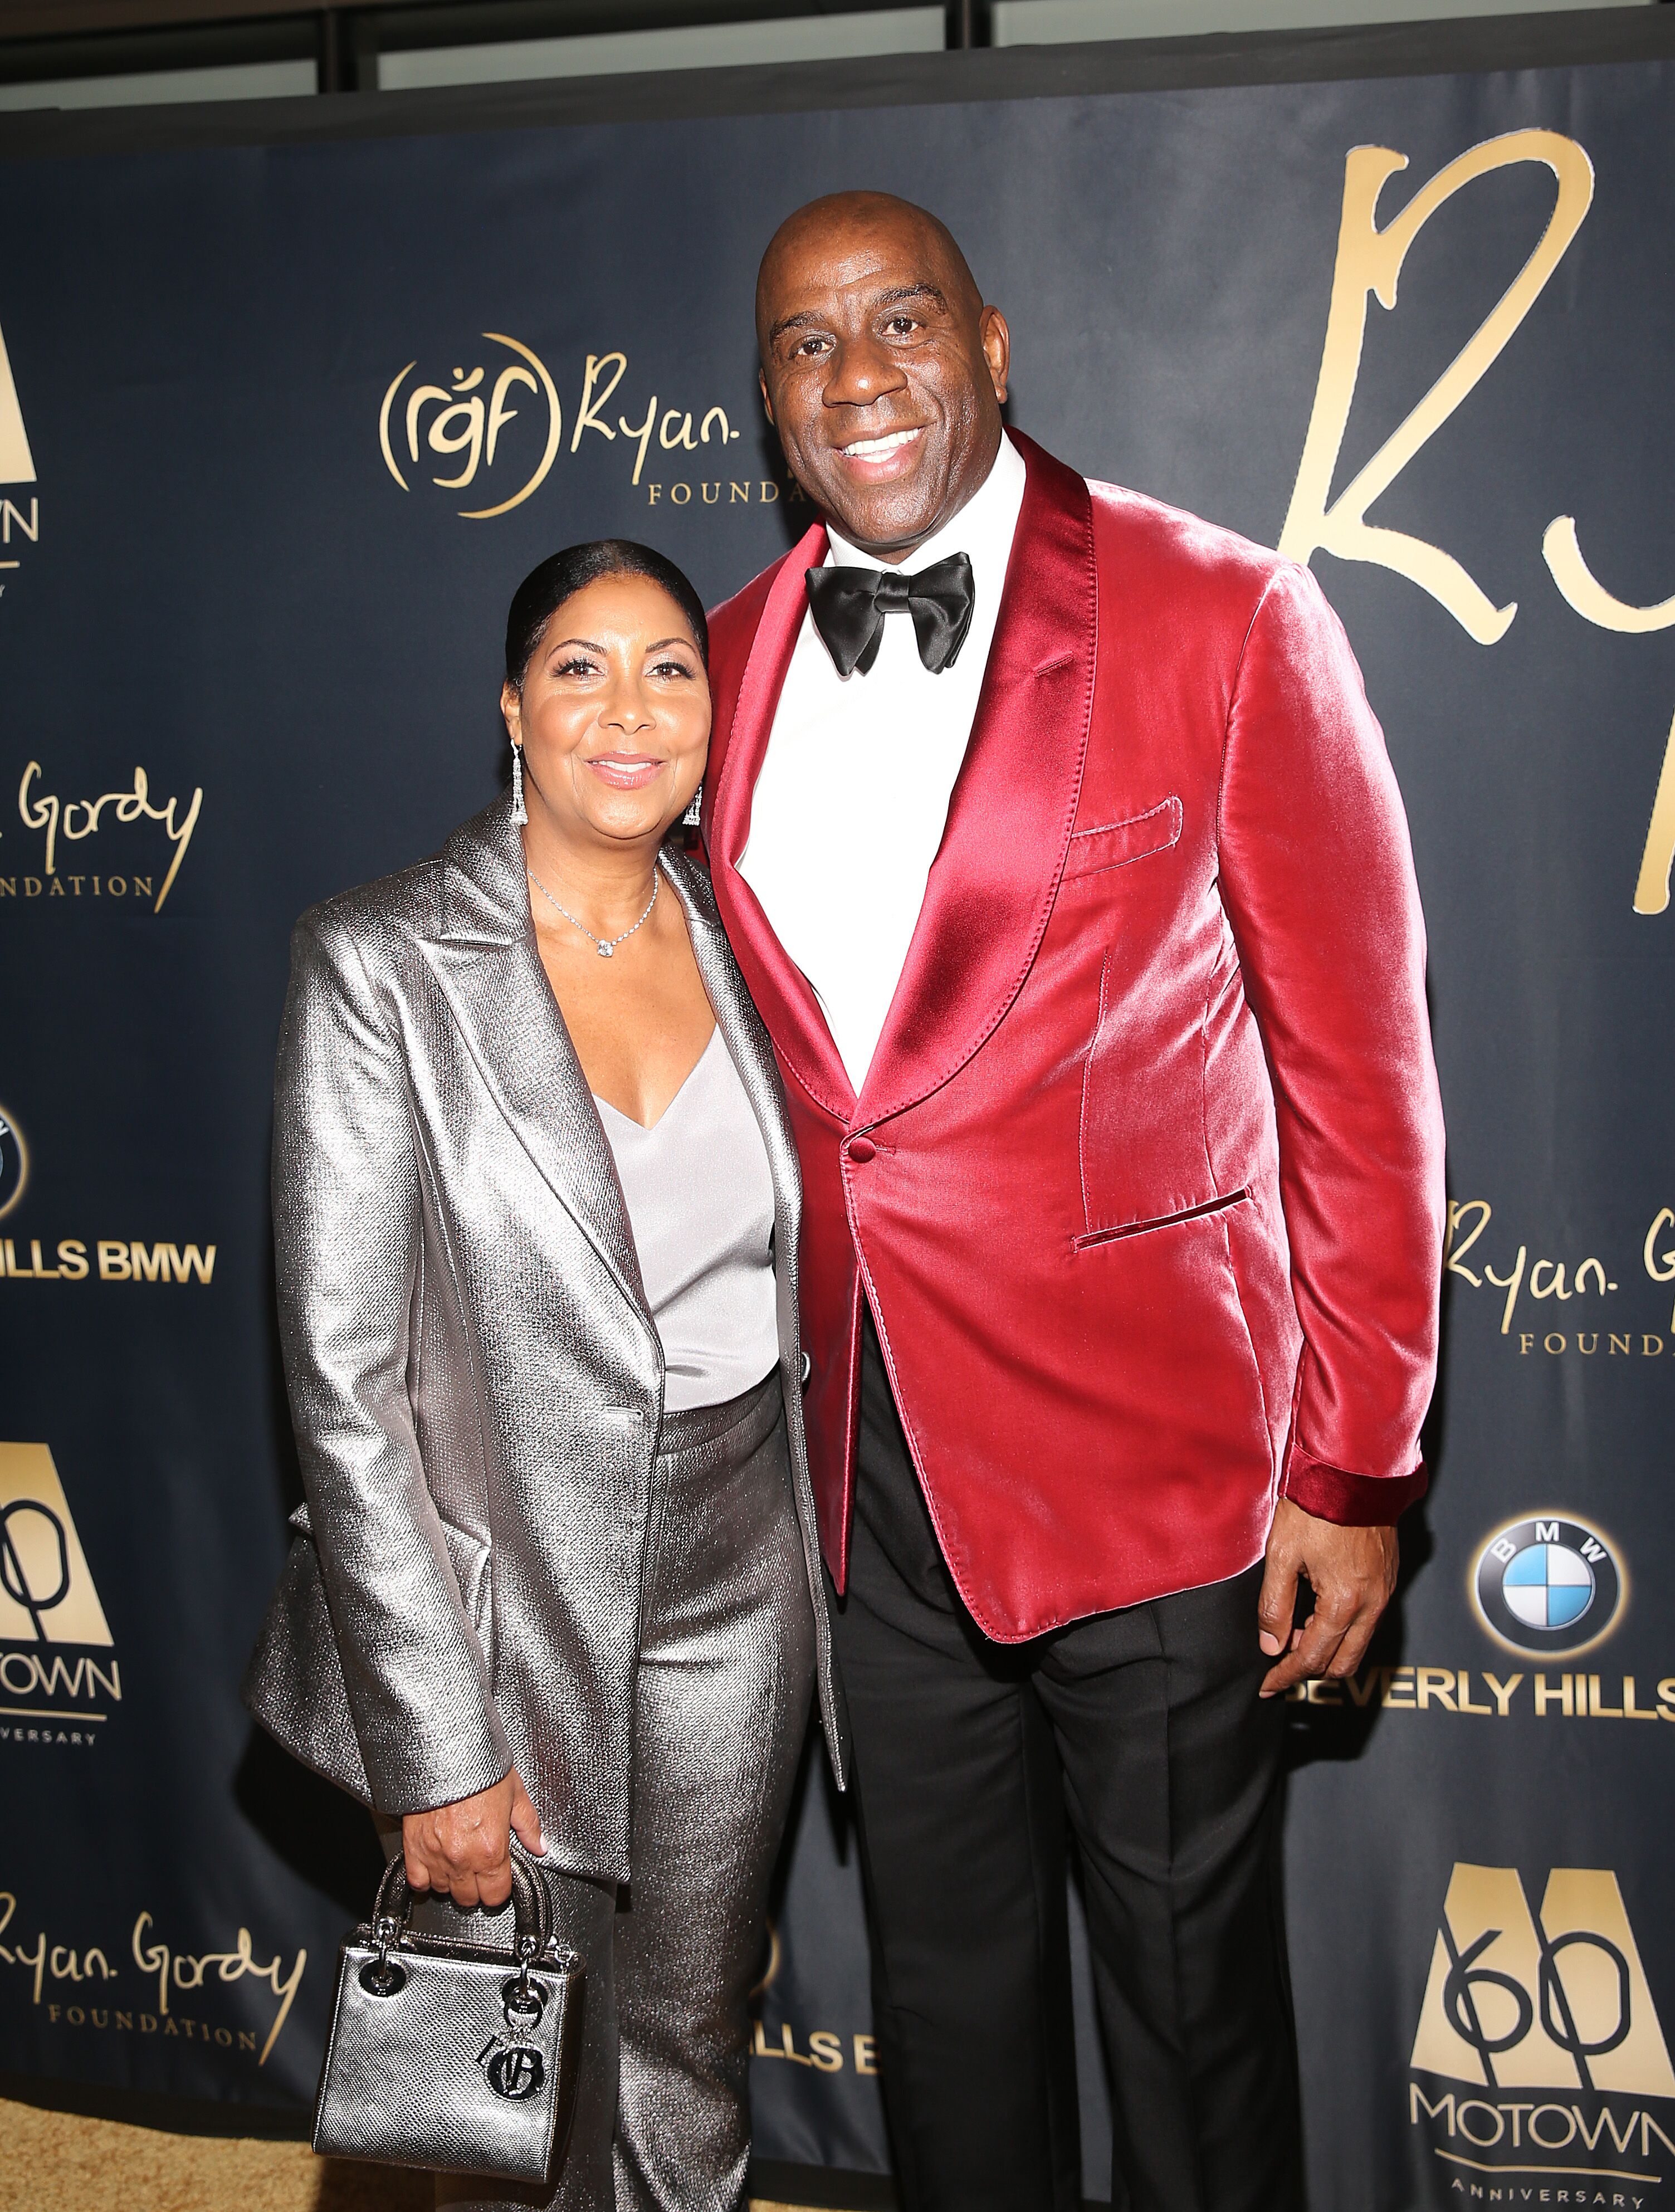 Magic and Cookie Johnson at a Ryan Gordy Foundation event | Source: Getty Images/GlobalImagesUkraine